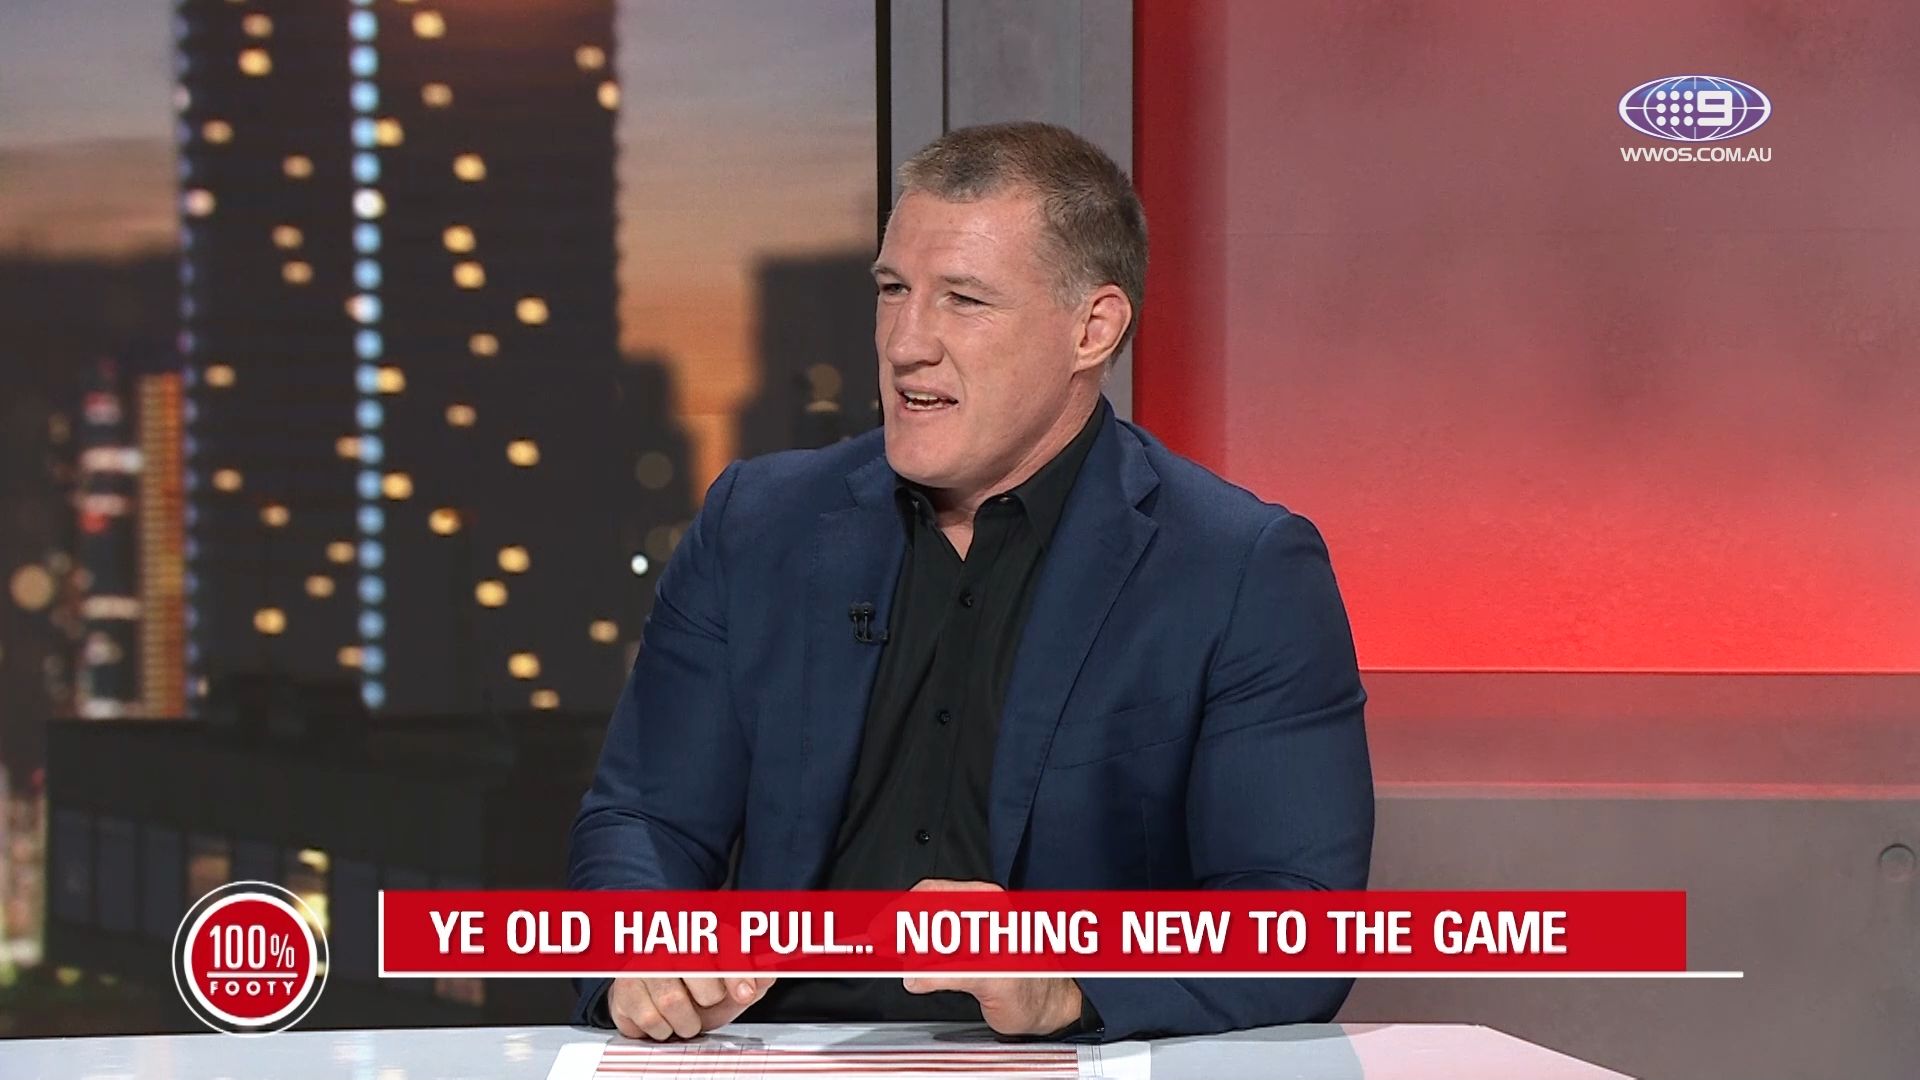 'Stupid': Factor NRL missed in hair pull furore as Gallen, Gould weigh in